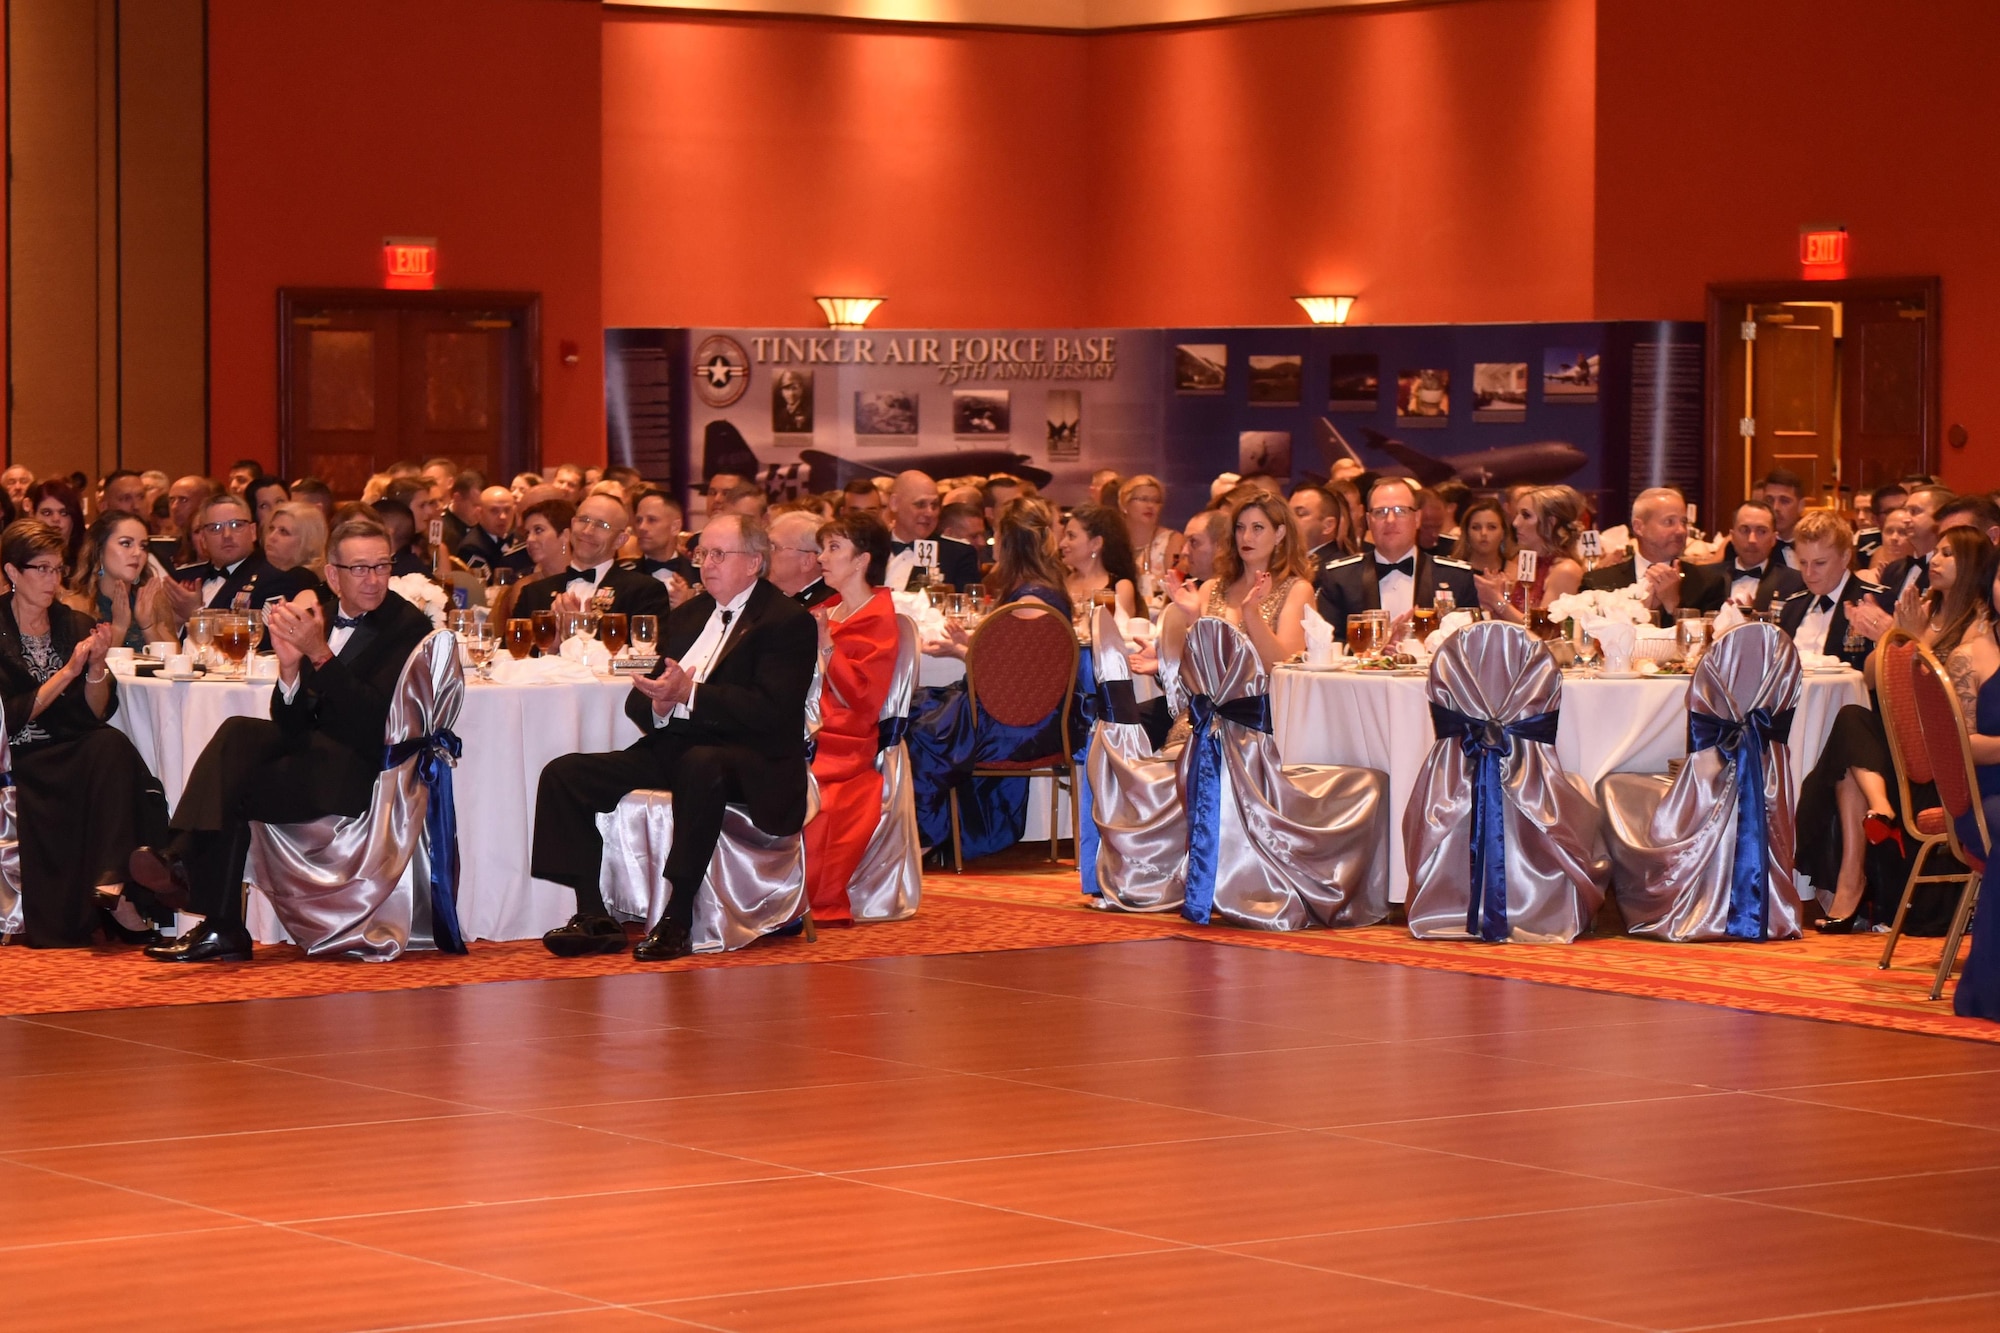 Team Tinker, their families and distinguished guests came out to the Embassy Suites in Norman, Oklahoma, on Sept. 16 to celebrate the 70th birthday of the Air Force and the 75th anniversary of Tinker Air Force Base during the Air Force Ball. Nearly 700 people attended the event.